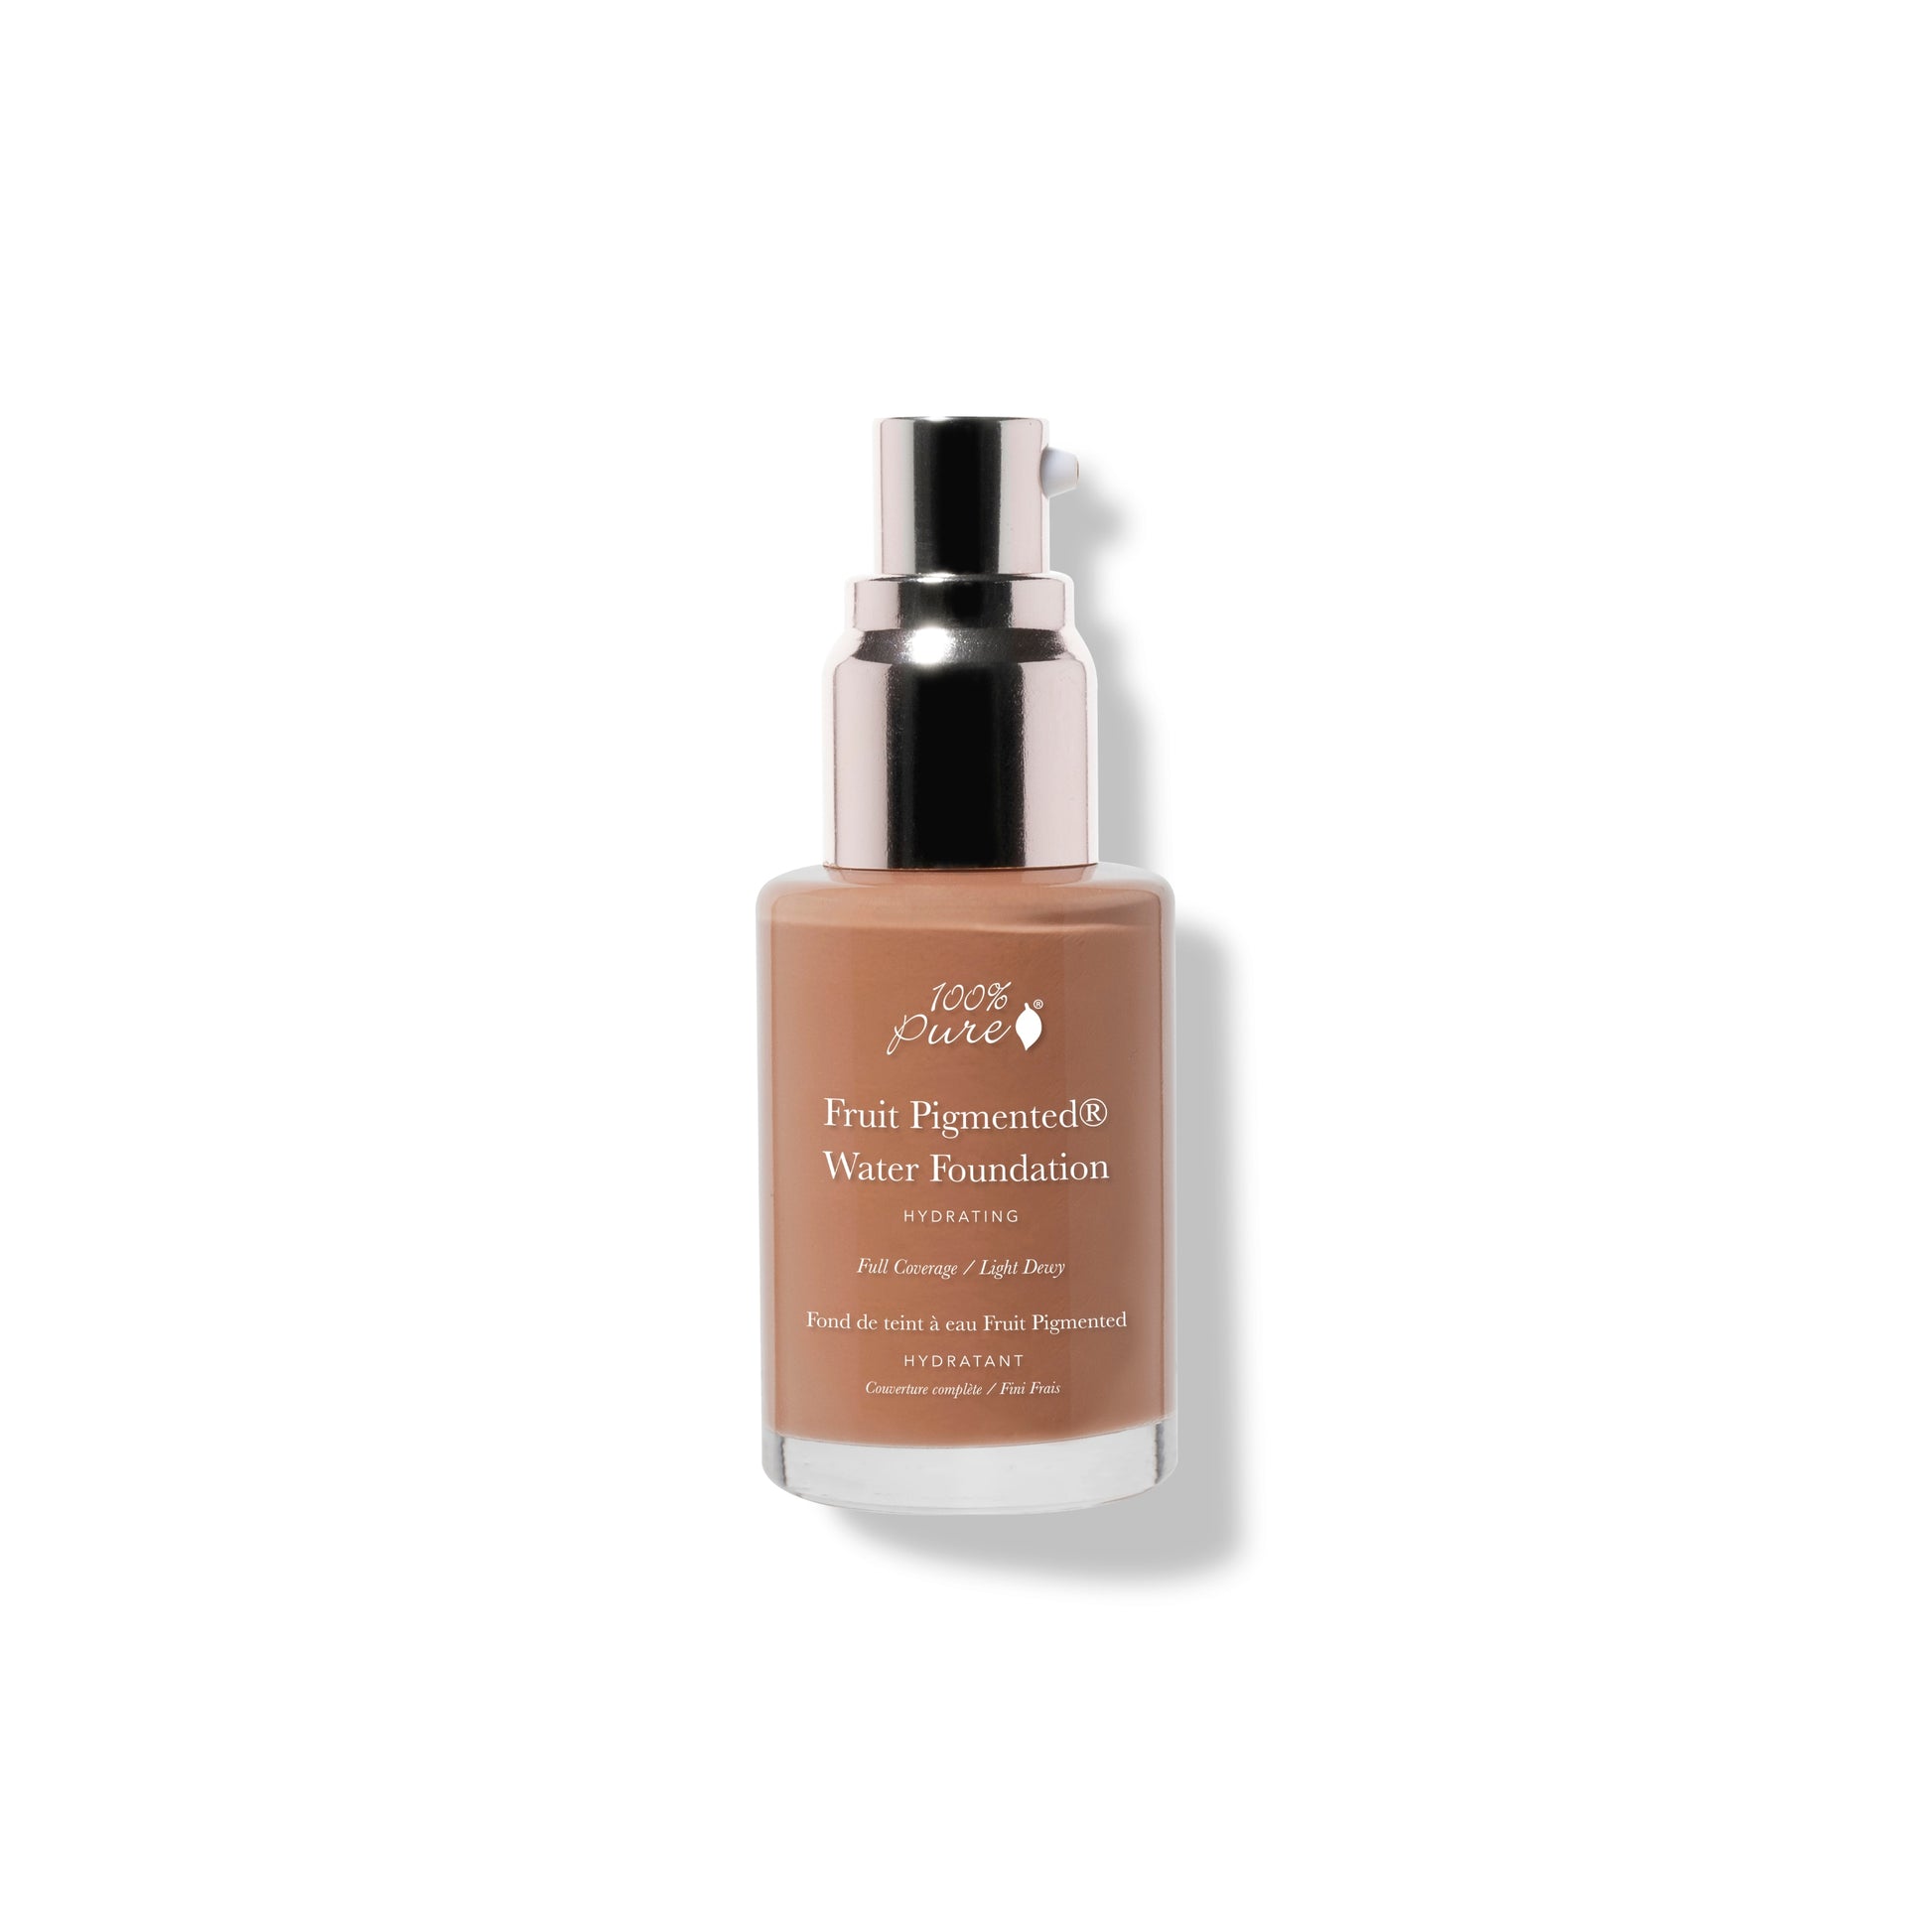 100% PURE Fruit Pigmented Full Coverage Water Foundation warm 6.0